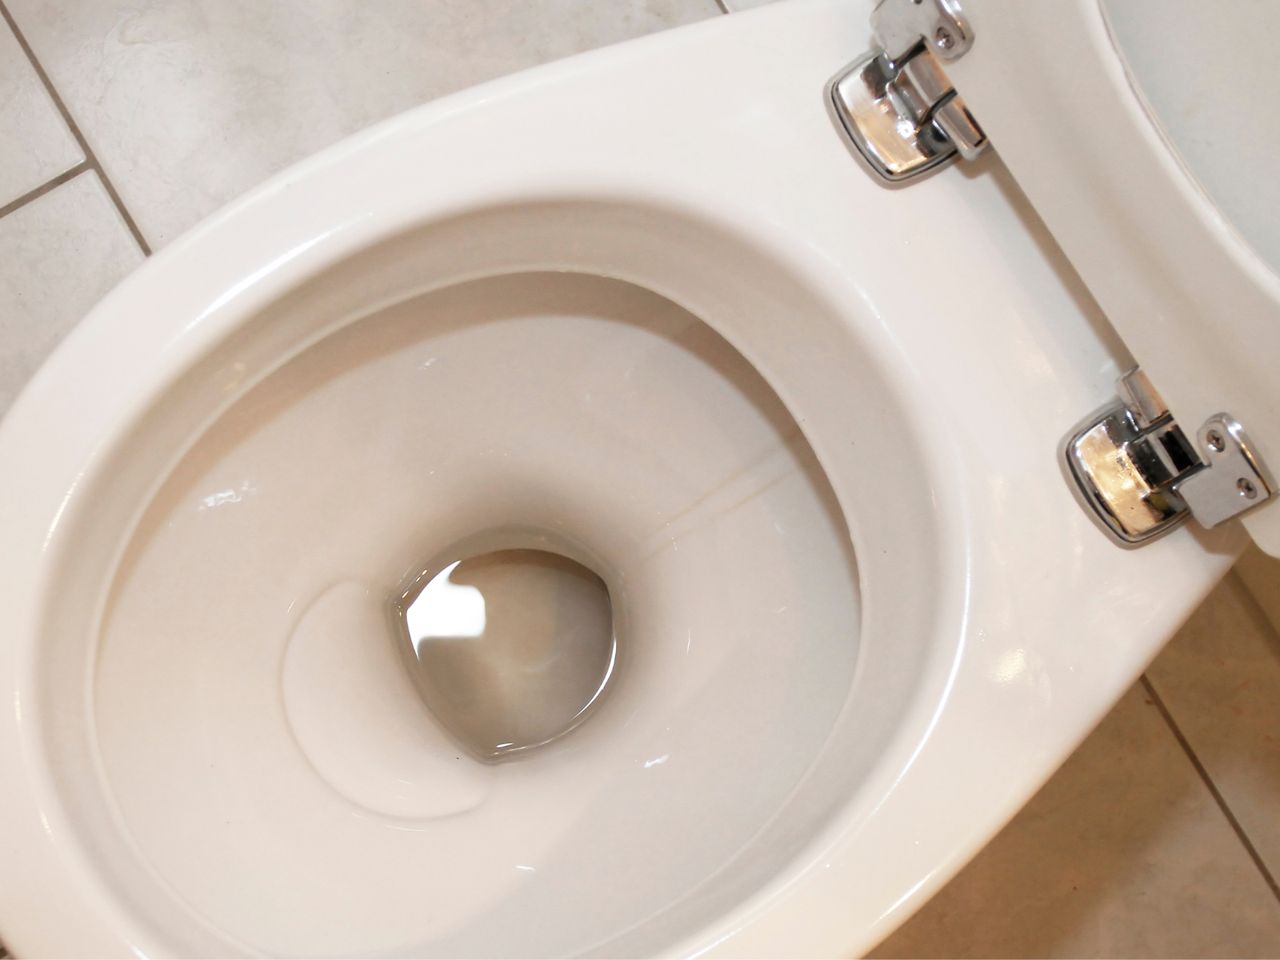 Cleaning the toilet in a homemade way is very simple.